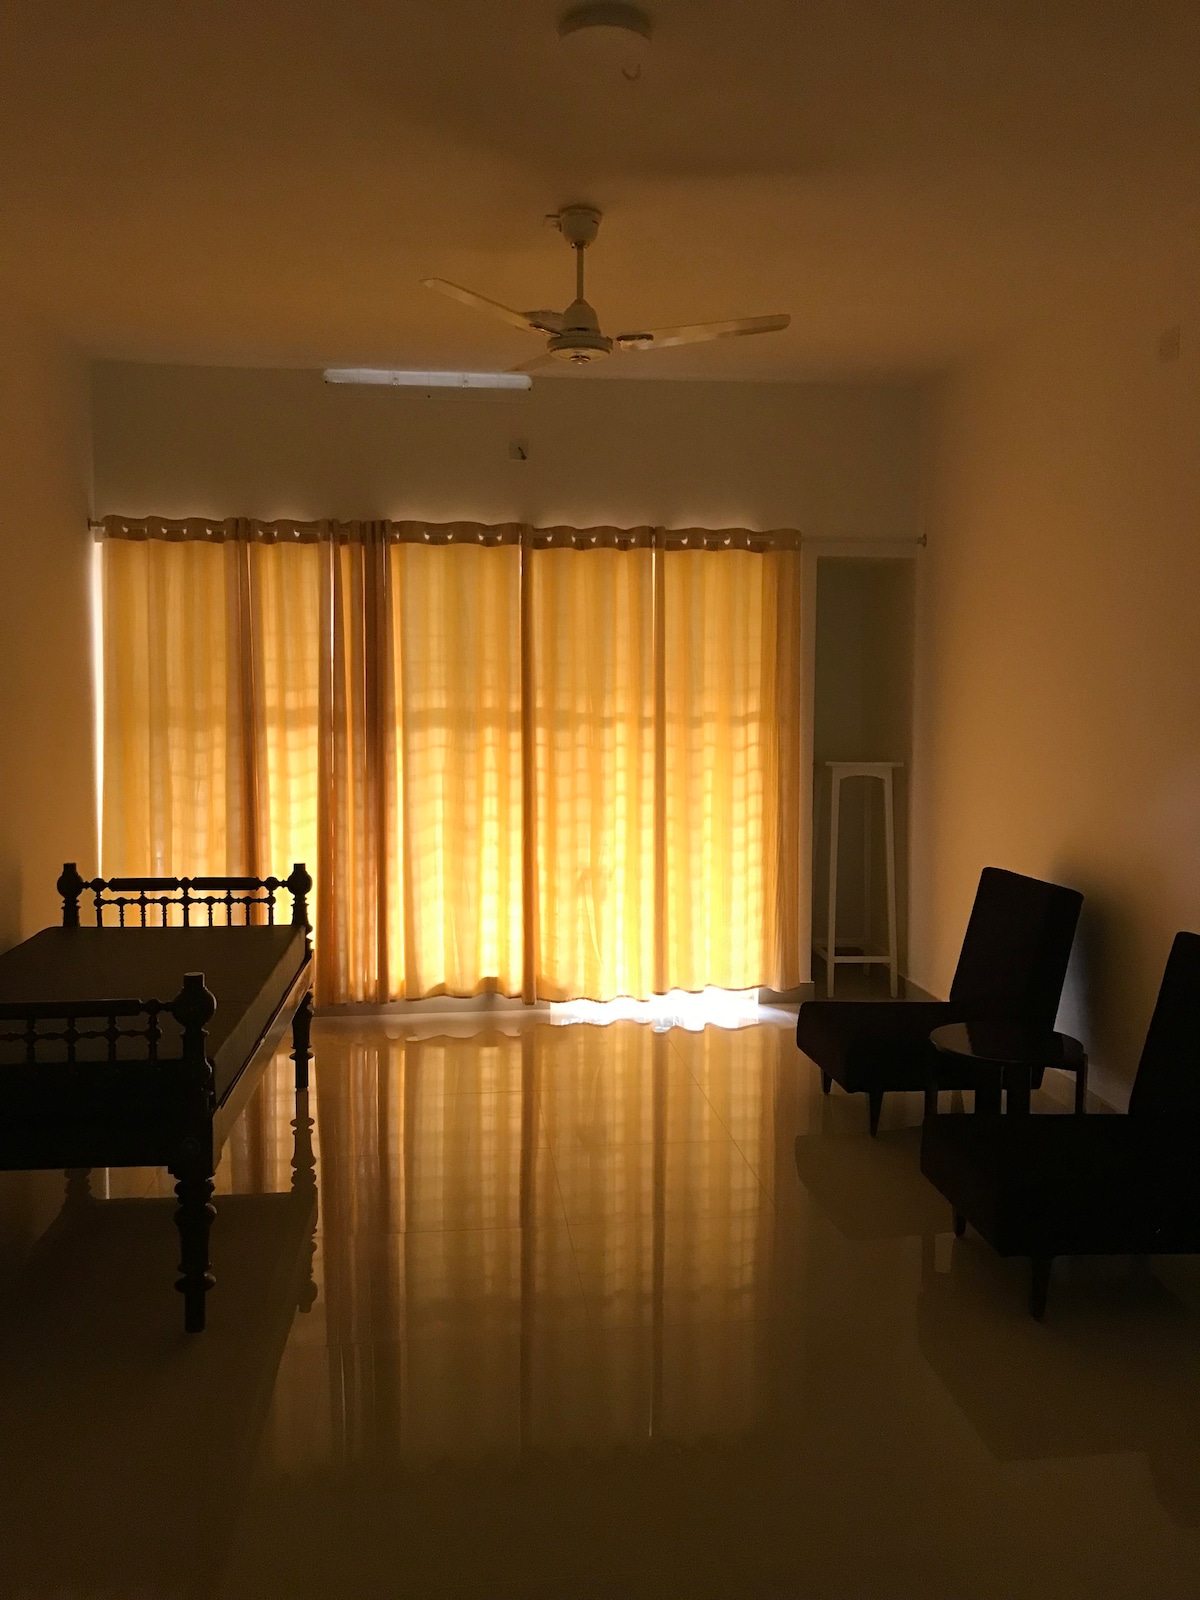 Spacious 3 bedroom - - heart of city - peaceful